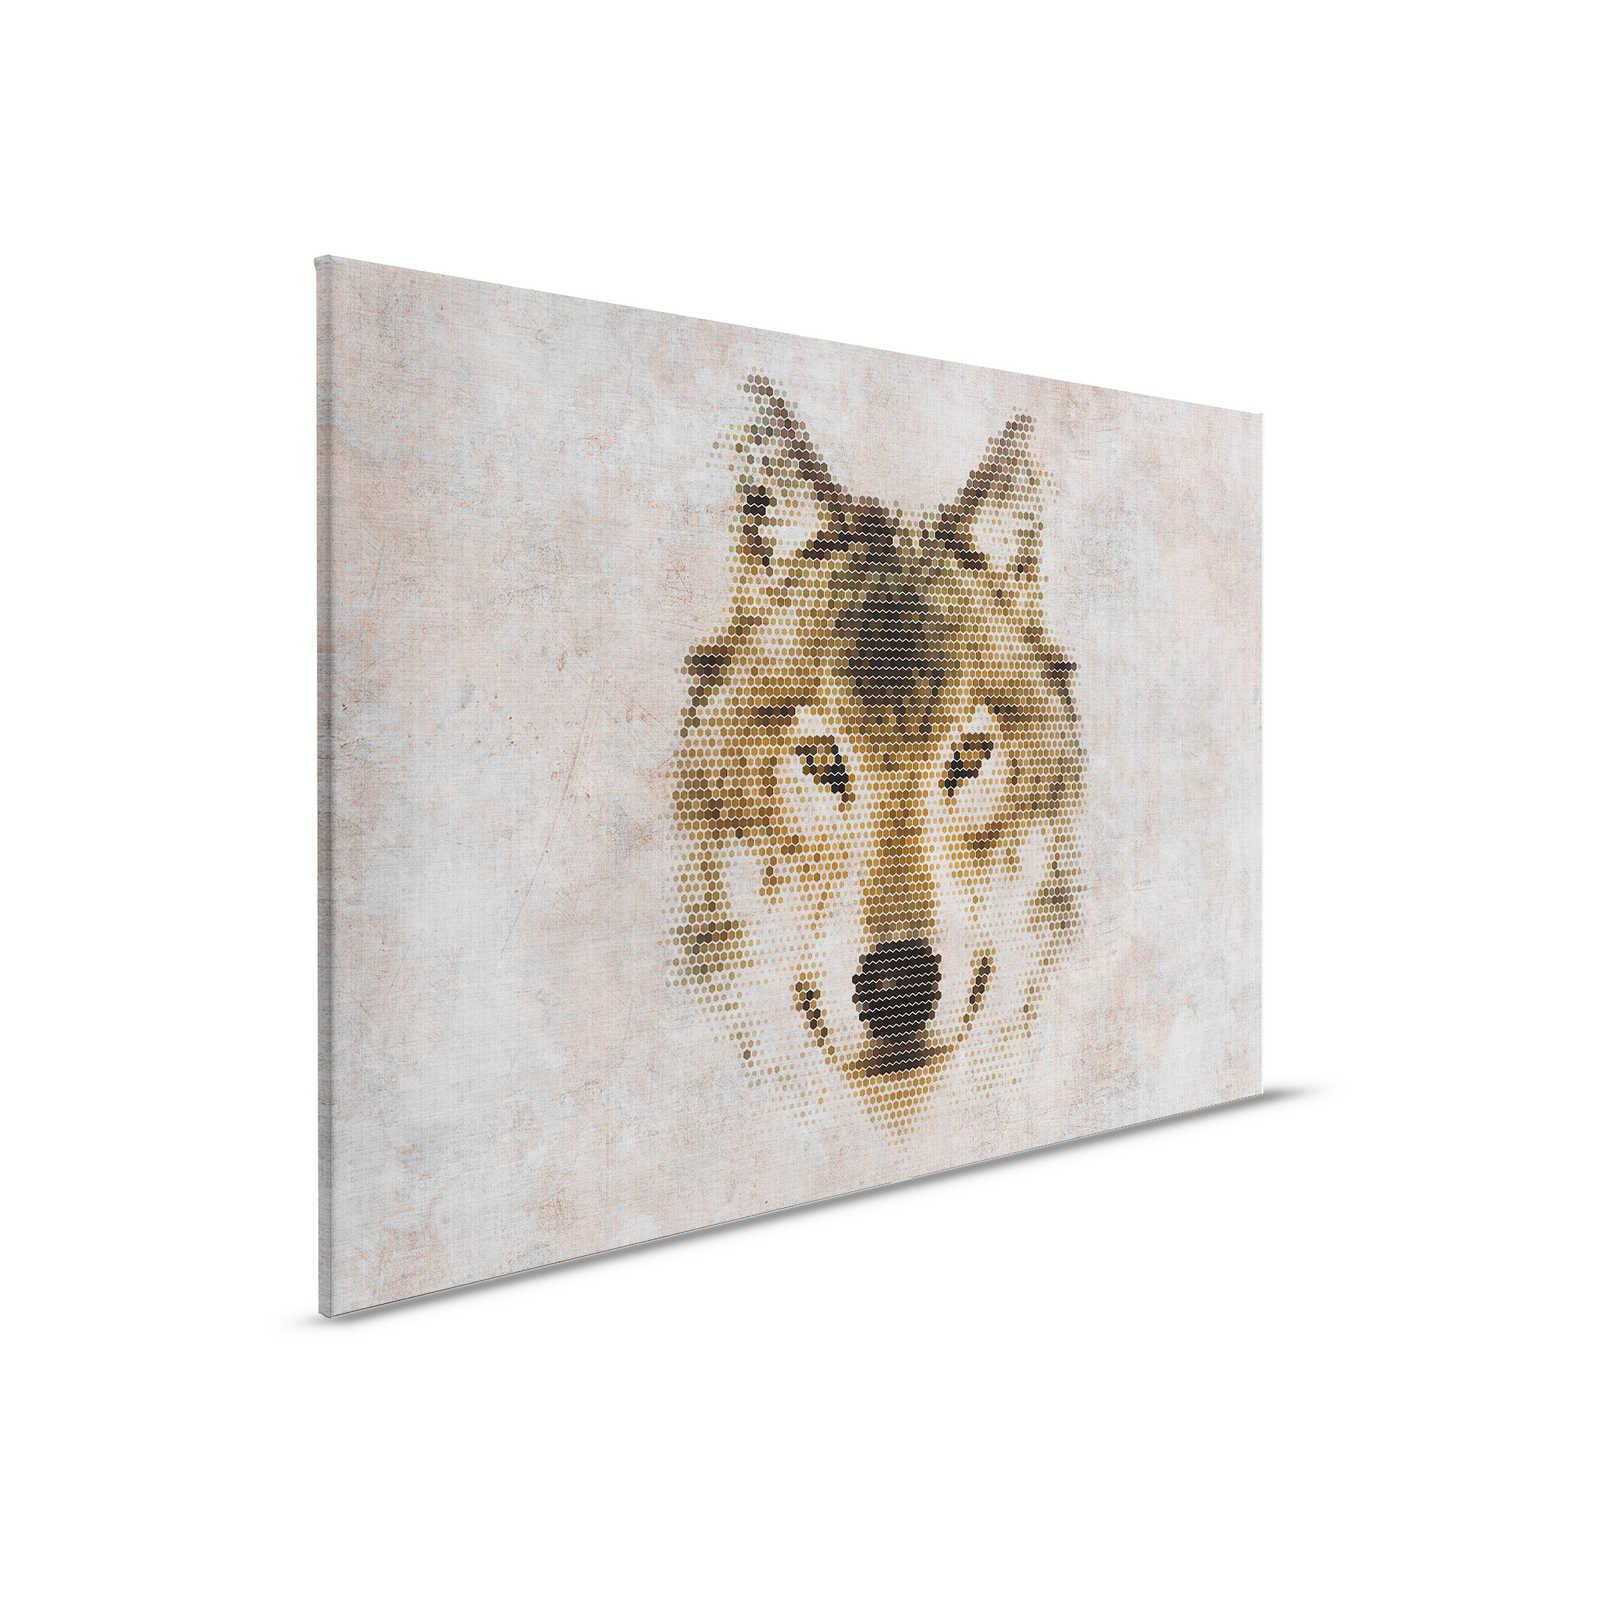         Big three 1 - Concrete-look canvas picture with wolf - natural linen structure - 0.90 m x 0.60 m
    